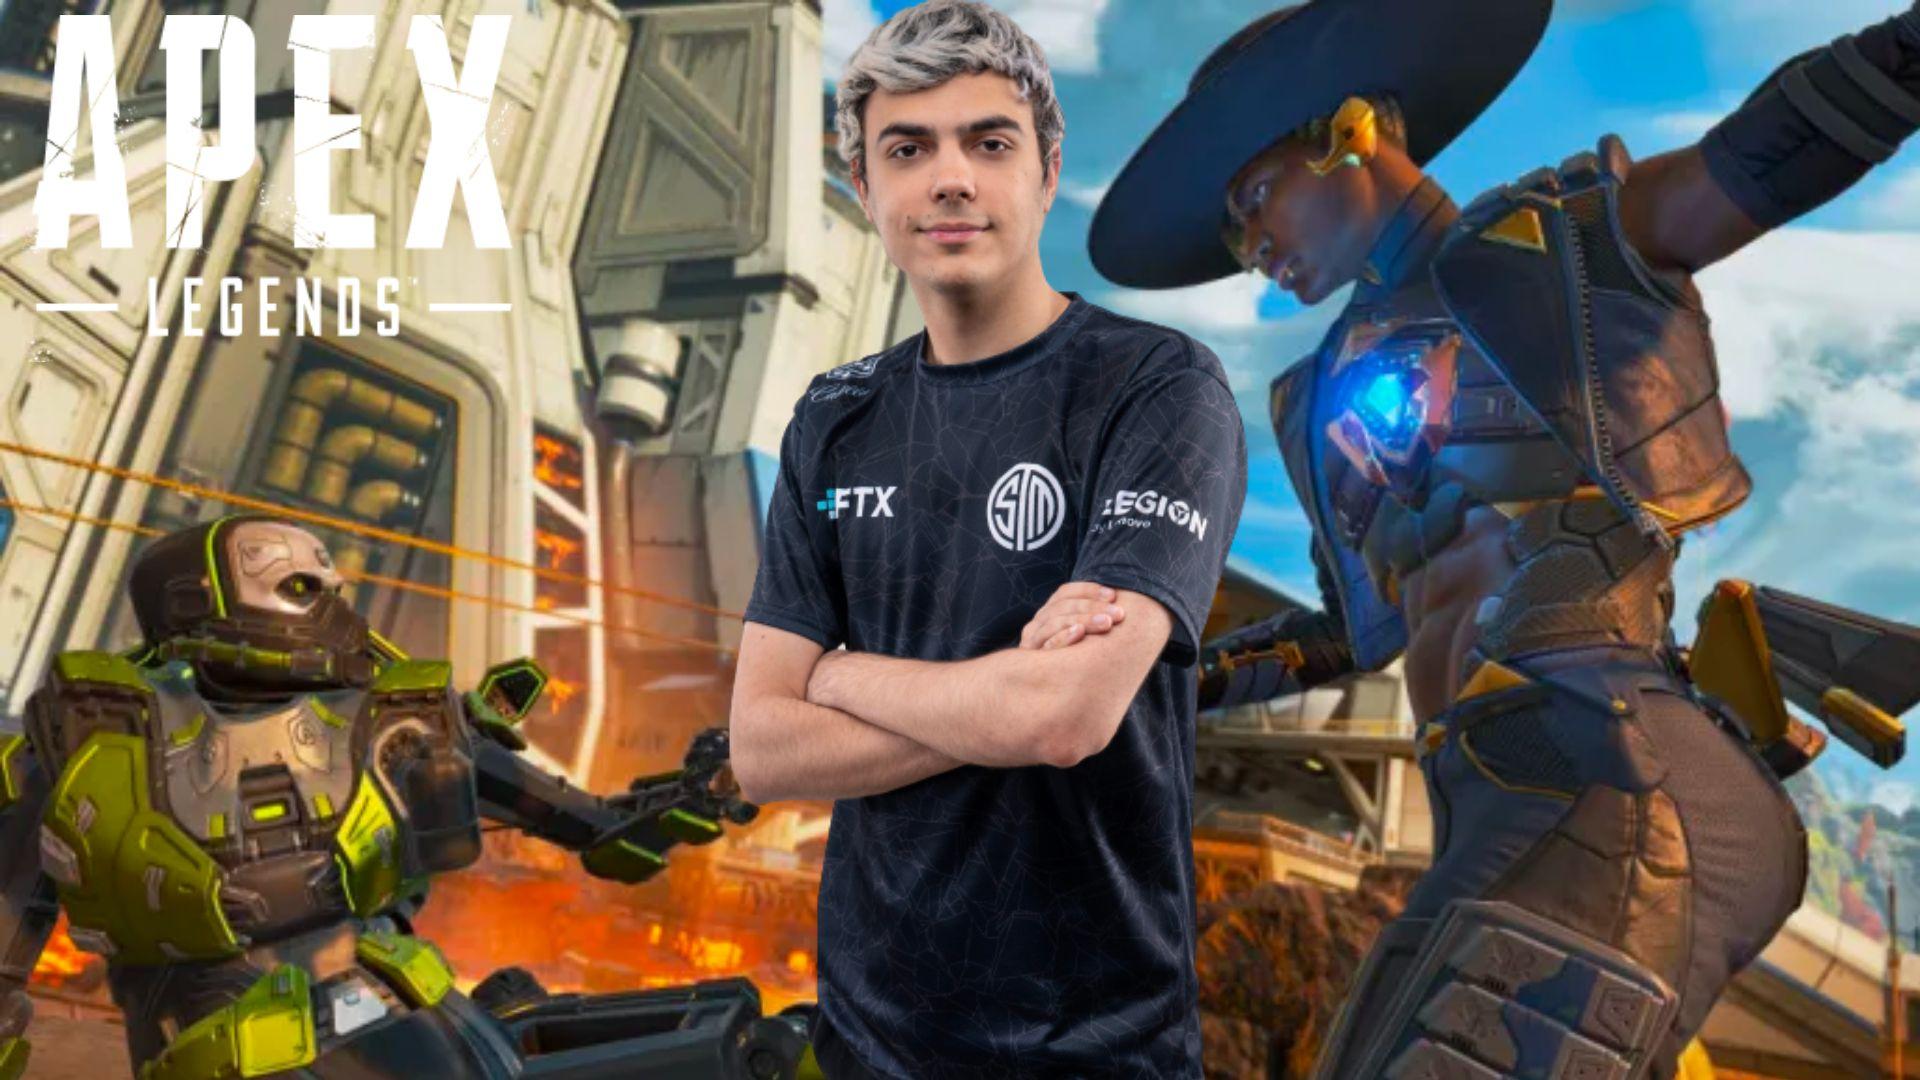 ImperialHal in front of Seer in Apex Legends